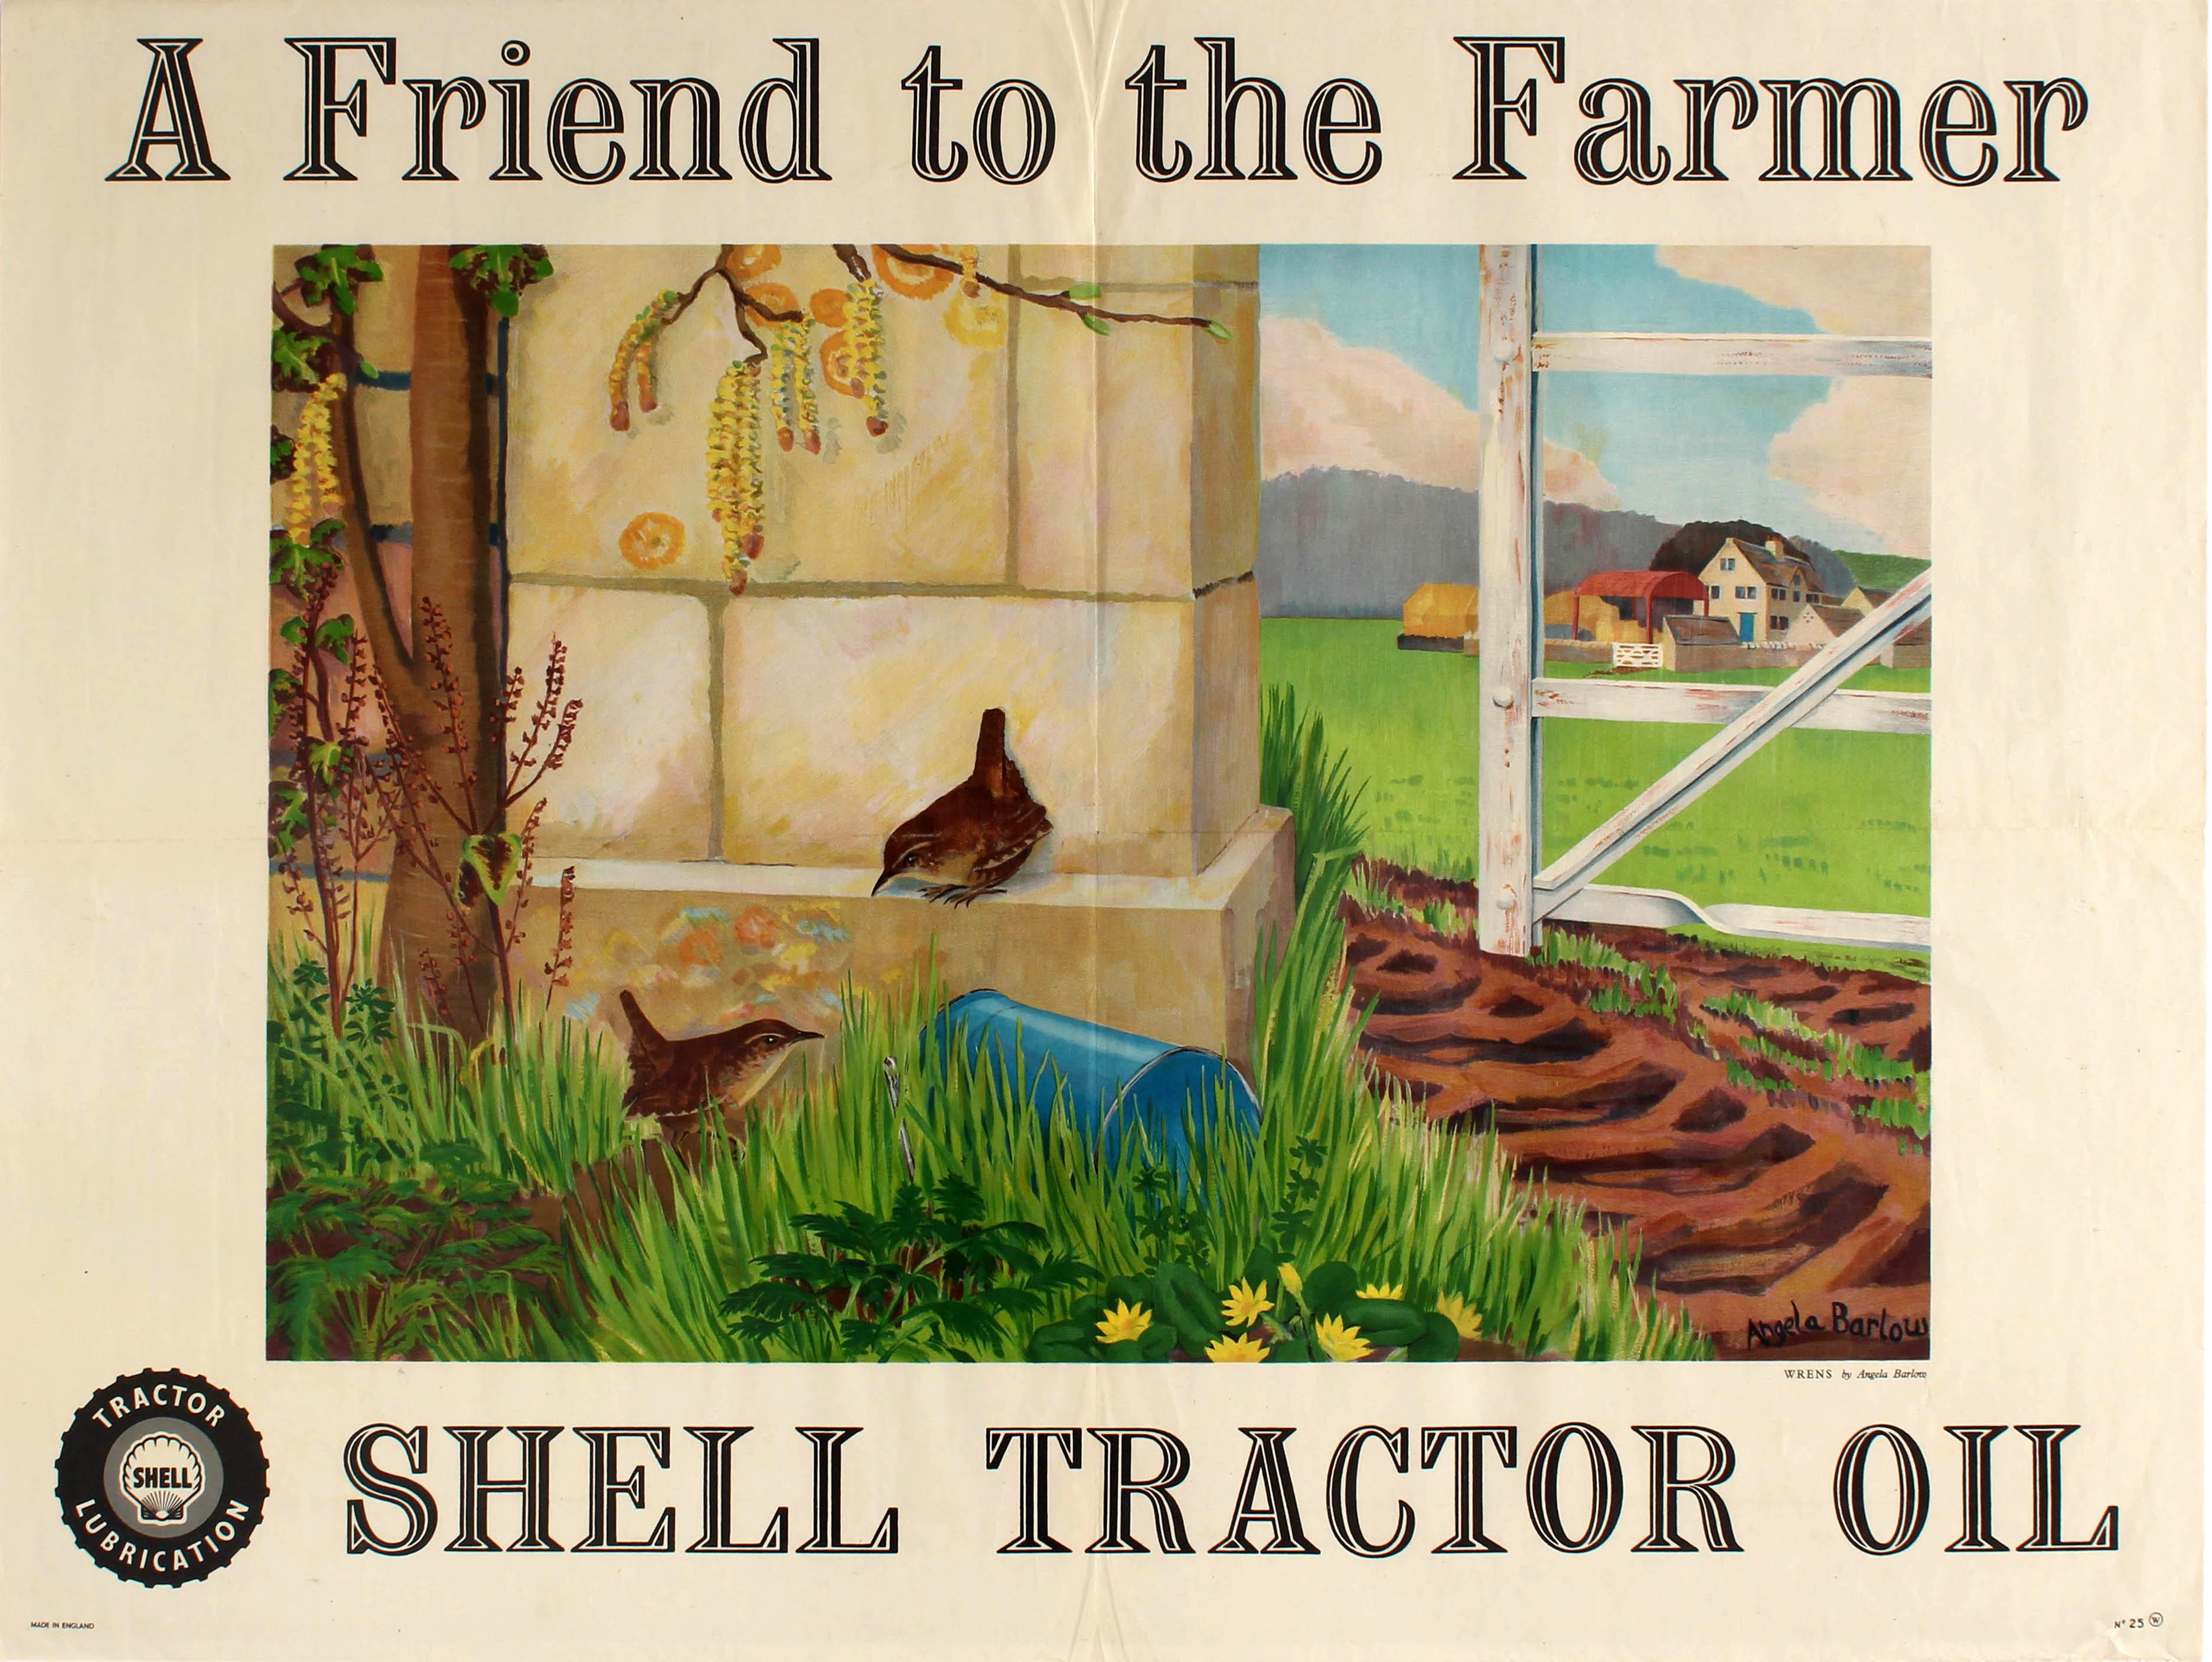 Angela Barlow Print - Original Vintage Poster A Friend To The Farmer Shell Tractor Oil Wrens Farm View